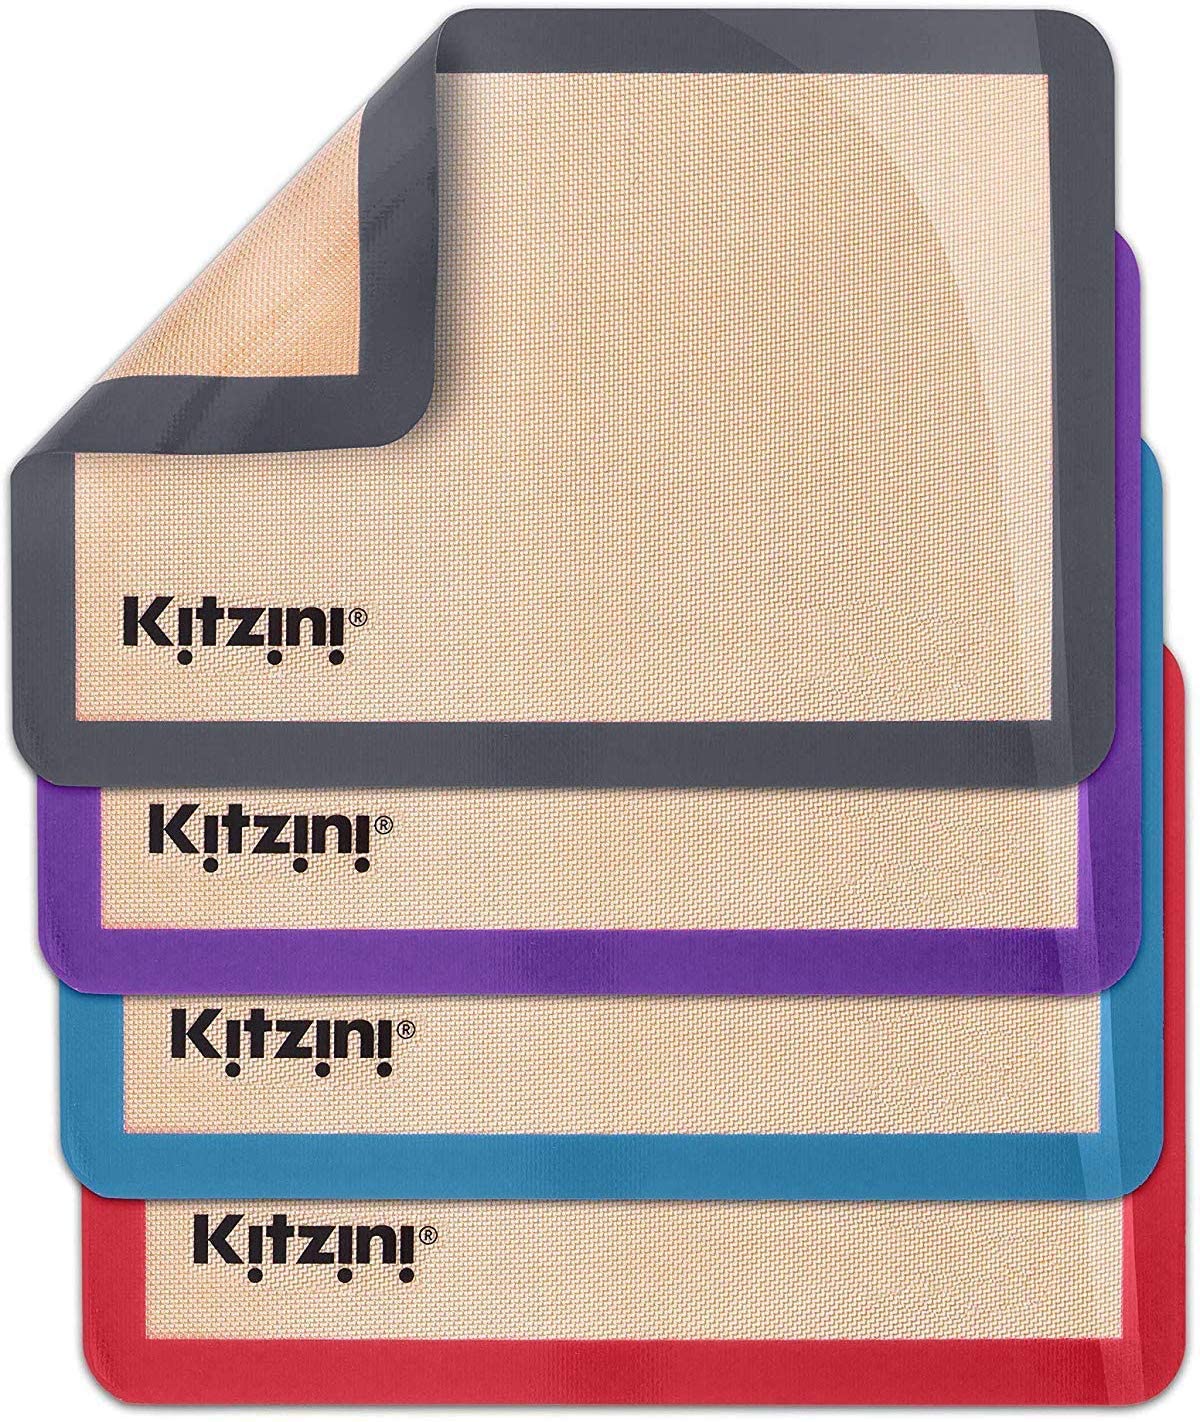 KITZINI Easy Store Silicone Baking Mats, 4-Pack